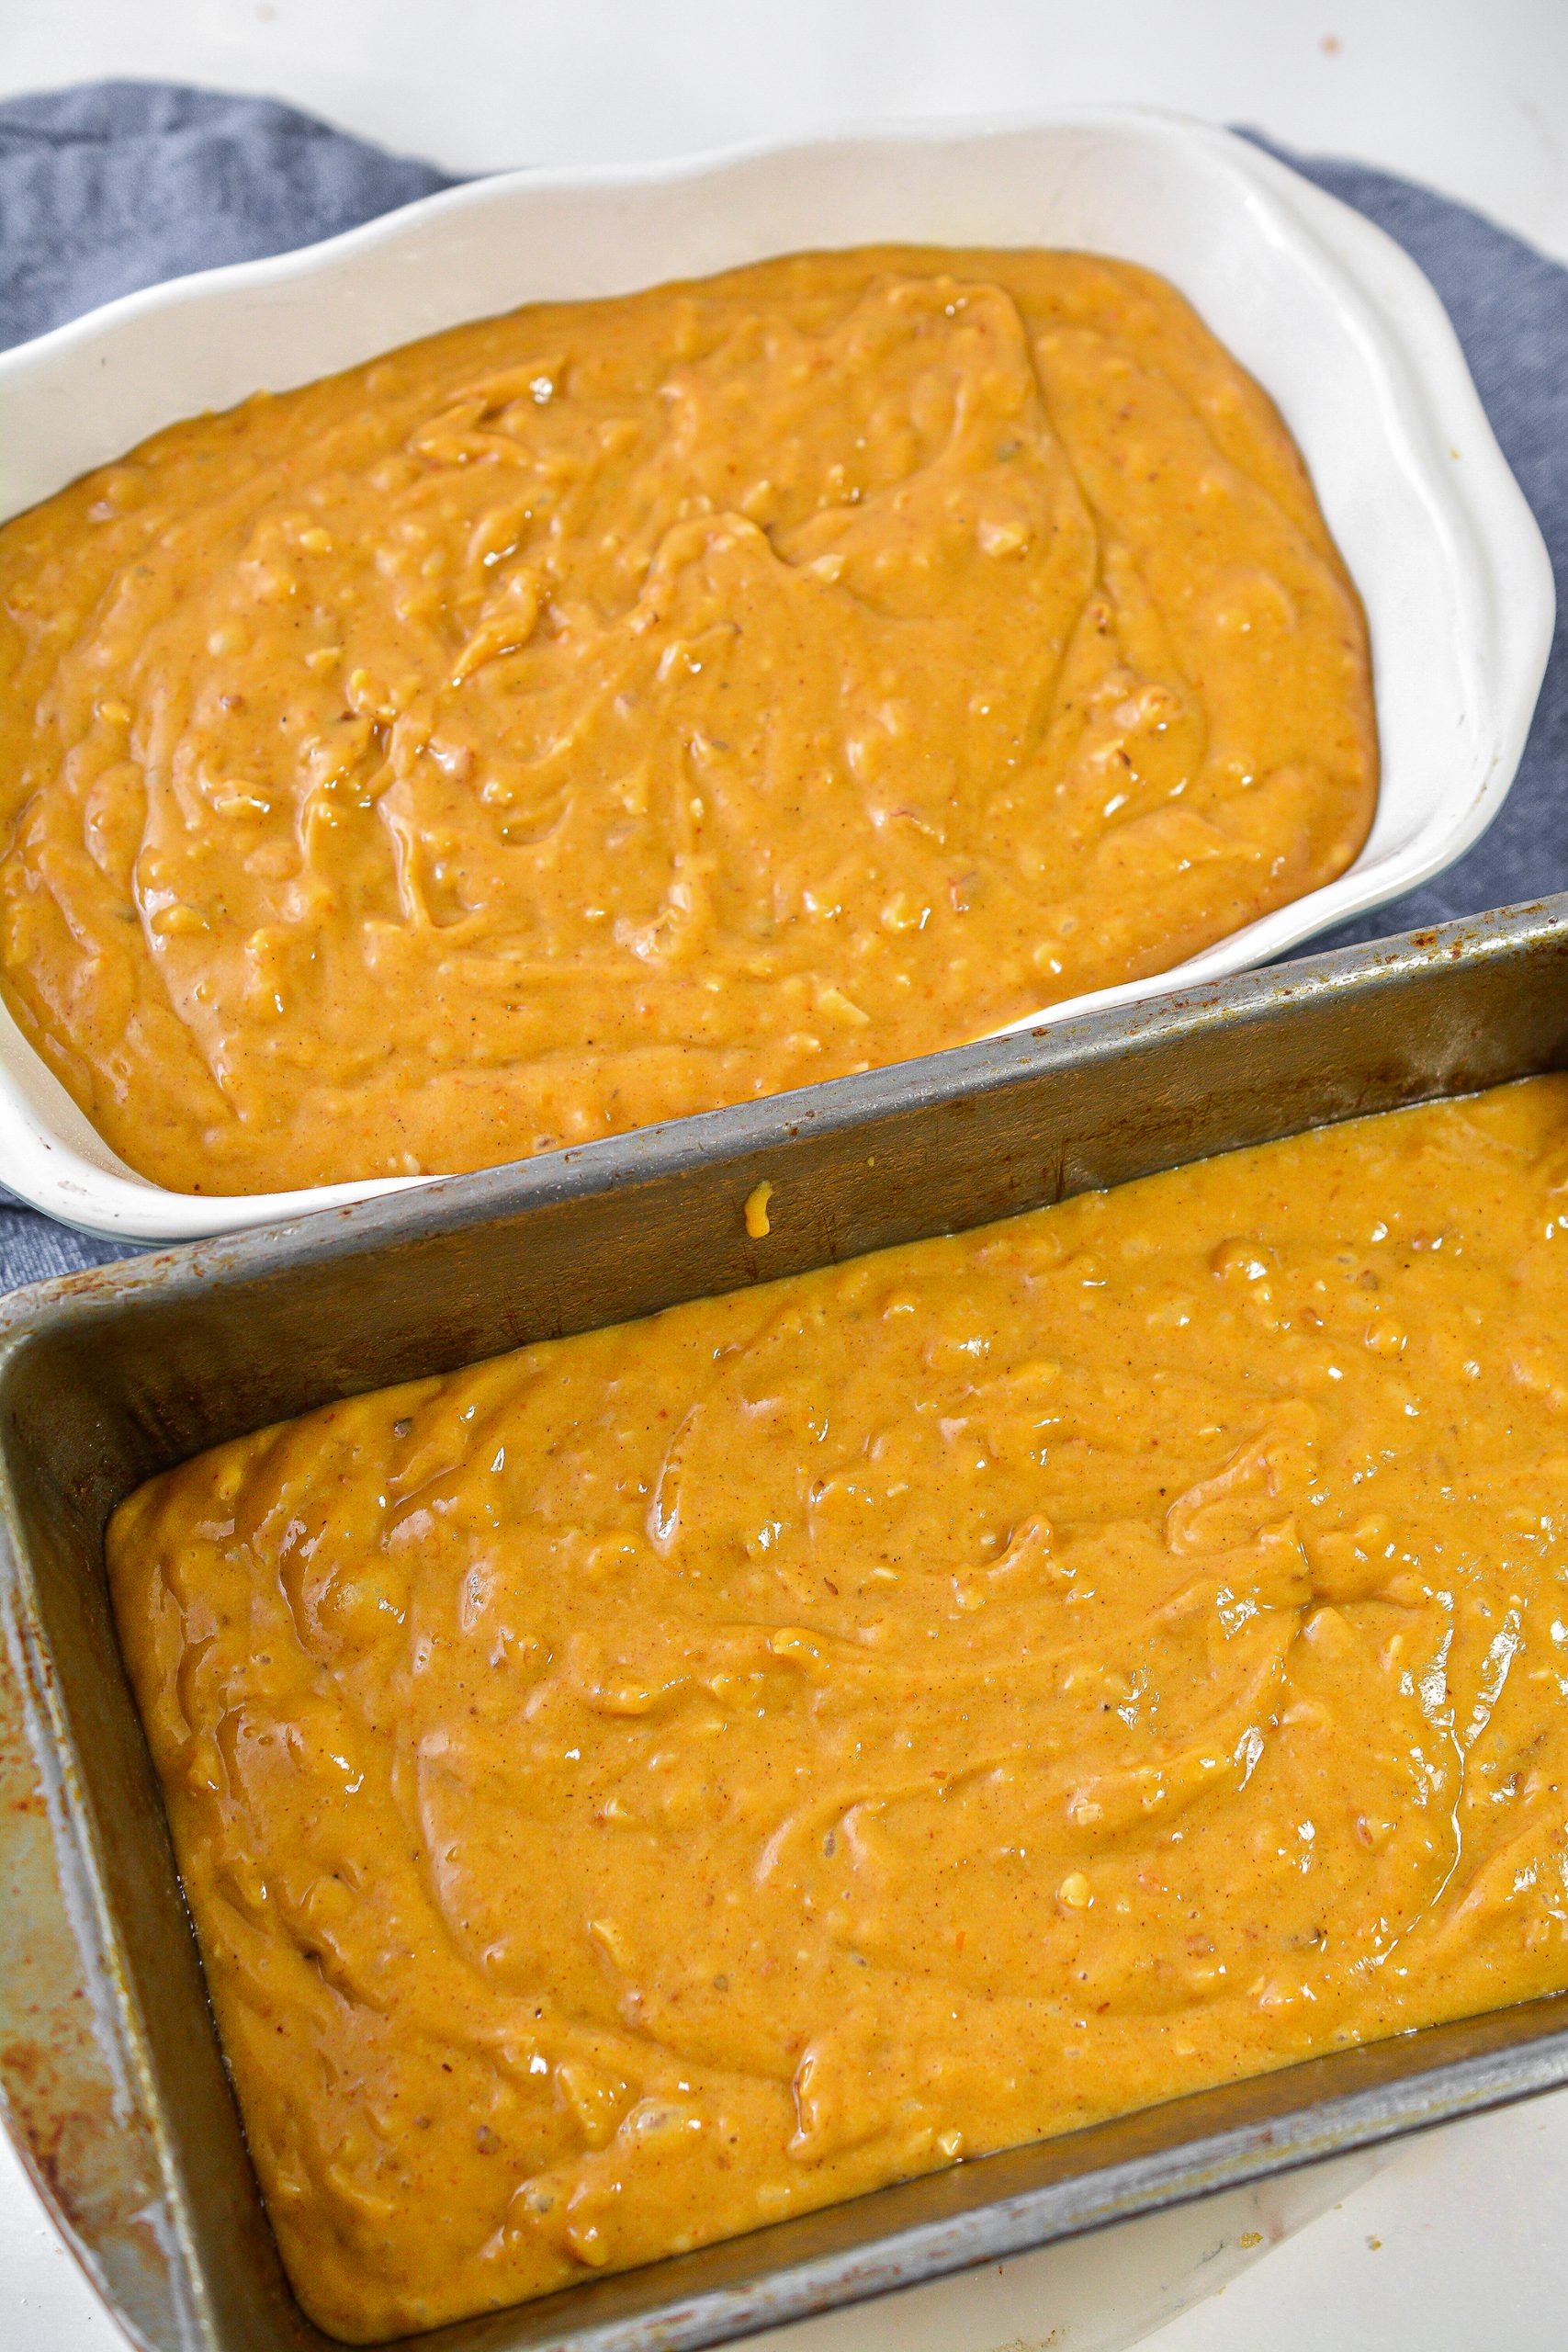 Pour the batter evenly into two well-greased loaf pans.